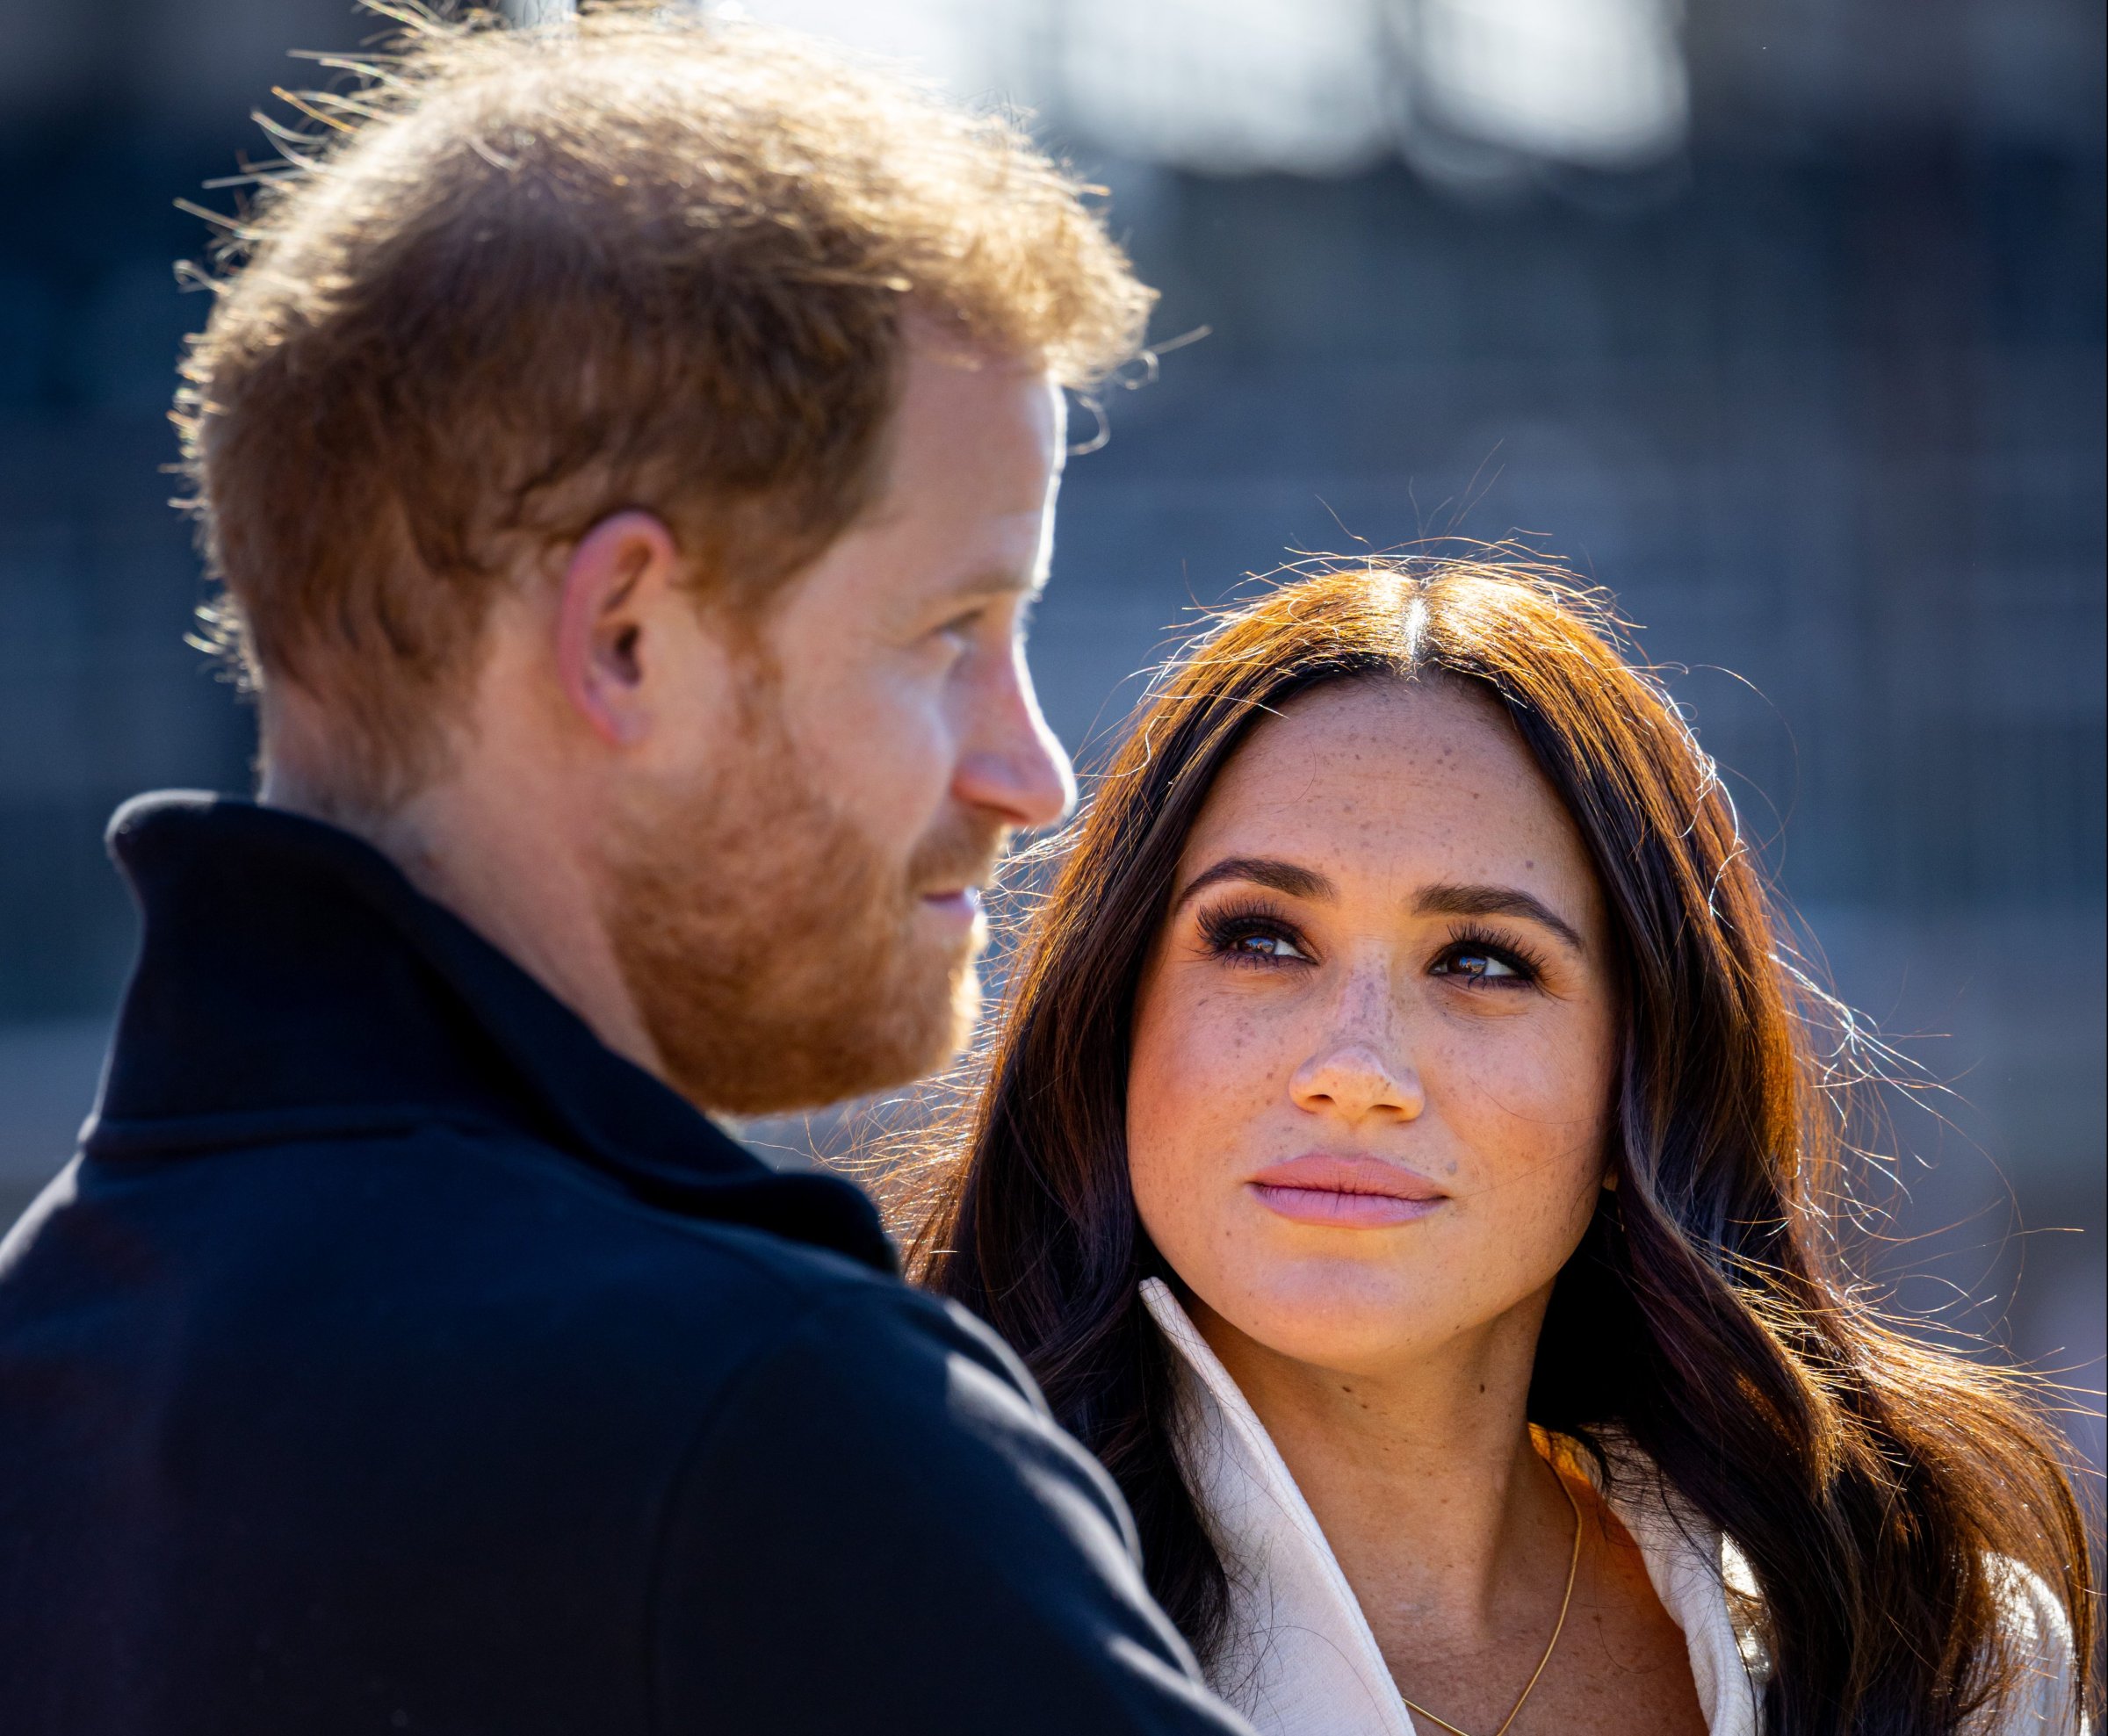 Prince Harry, Duke of Sussex and Meghan, Duchess of Sussex attend day two of the Invictus Games 2020 at Zuiderpark on April 17, 2022 in The Hague, Netherlands.